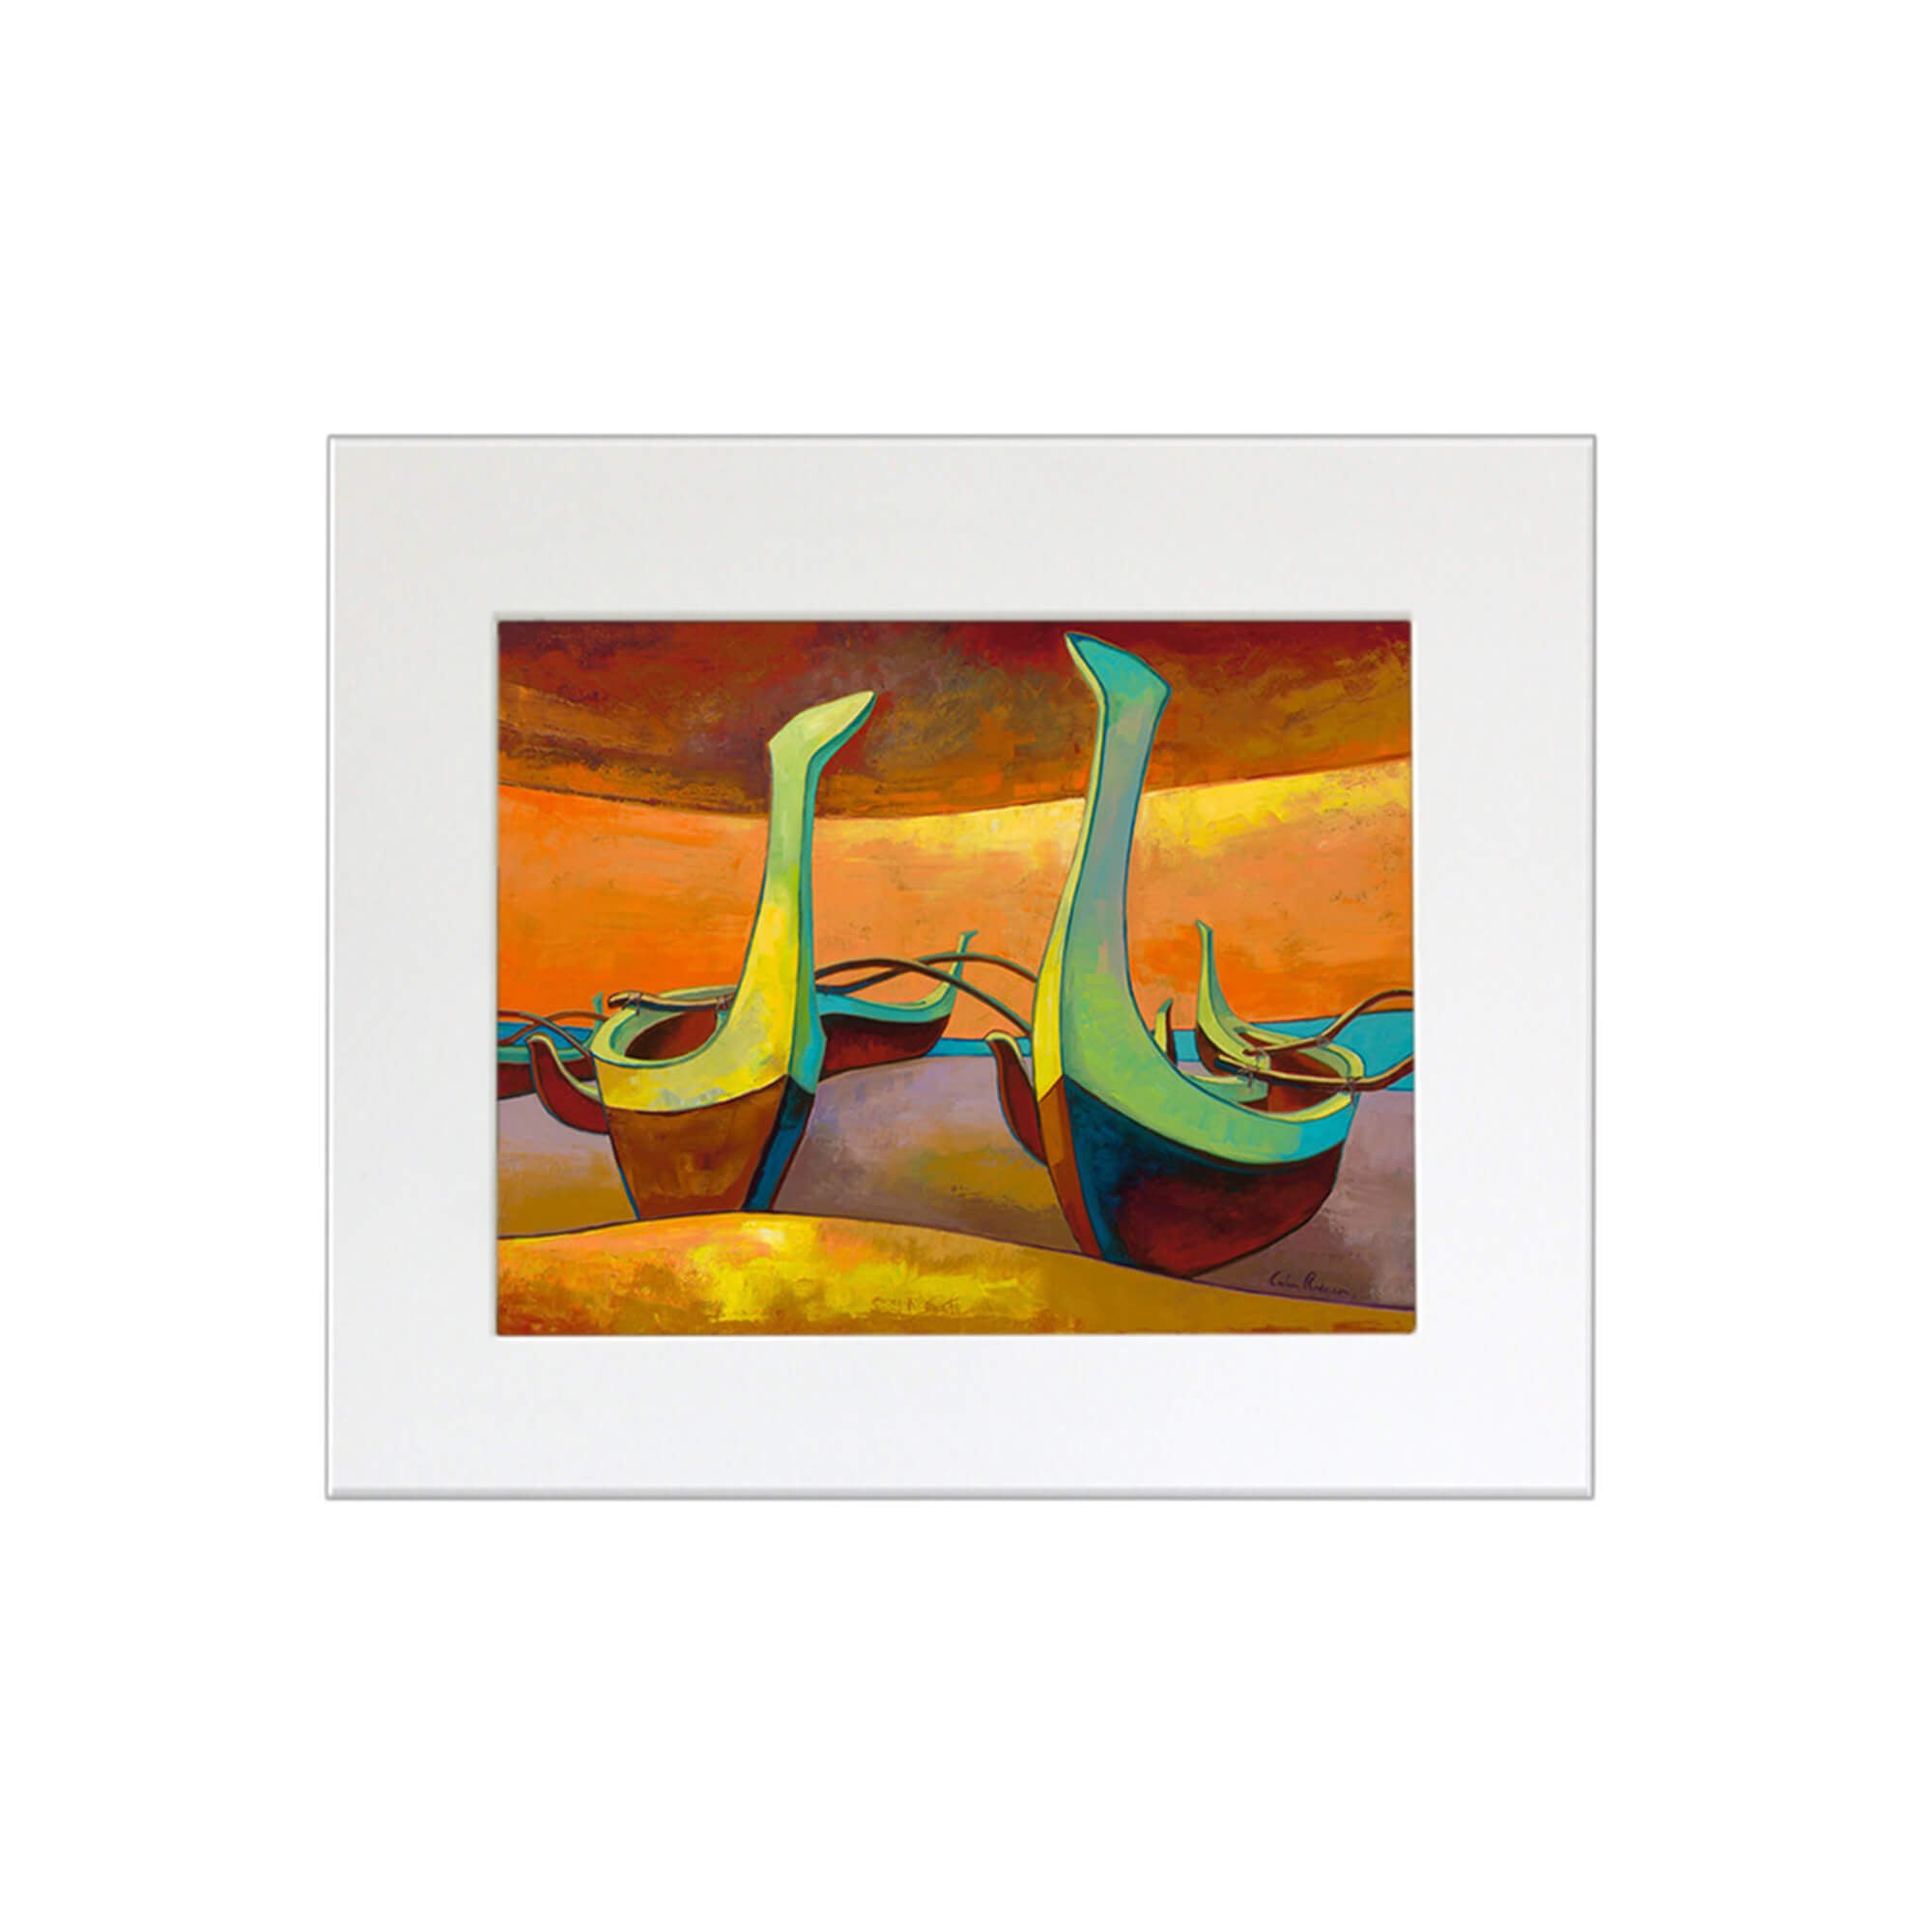 Two boats with sunset light by Hawaii artist Colin Redican